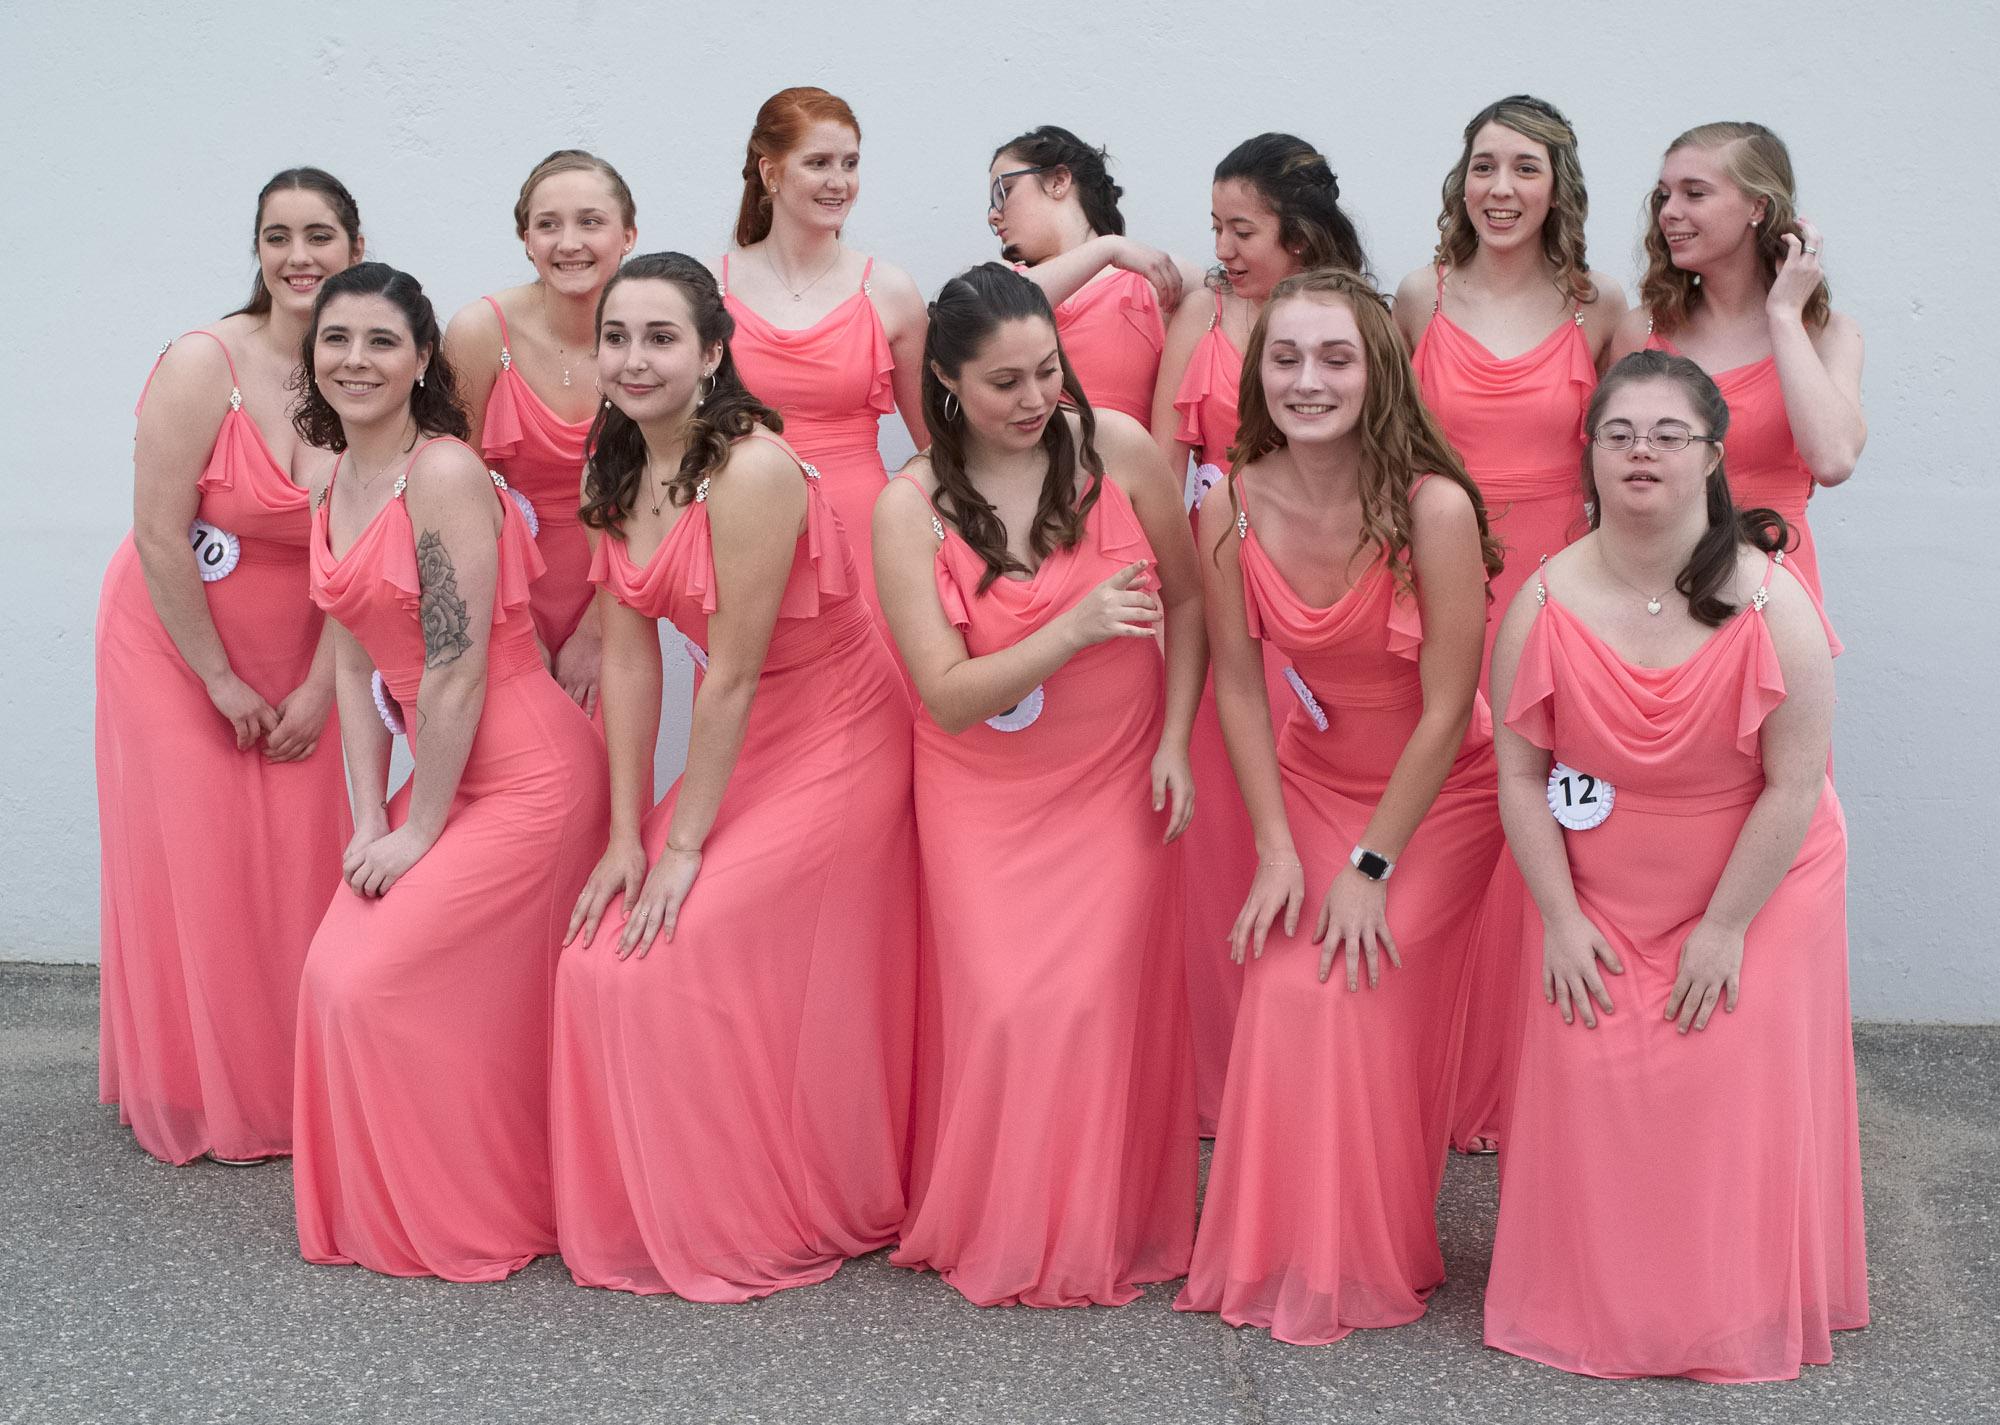 Farewell, With Elegance - The contestants of the 63rd Apple Blossom Cotillion get...